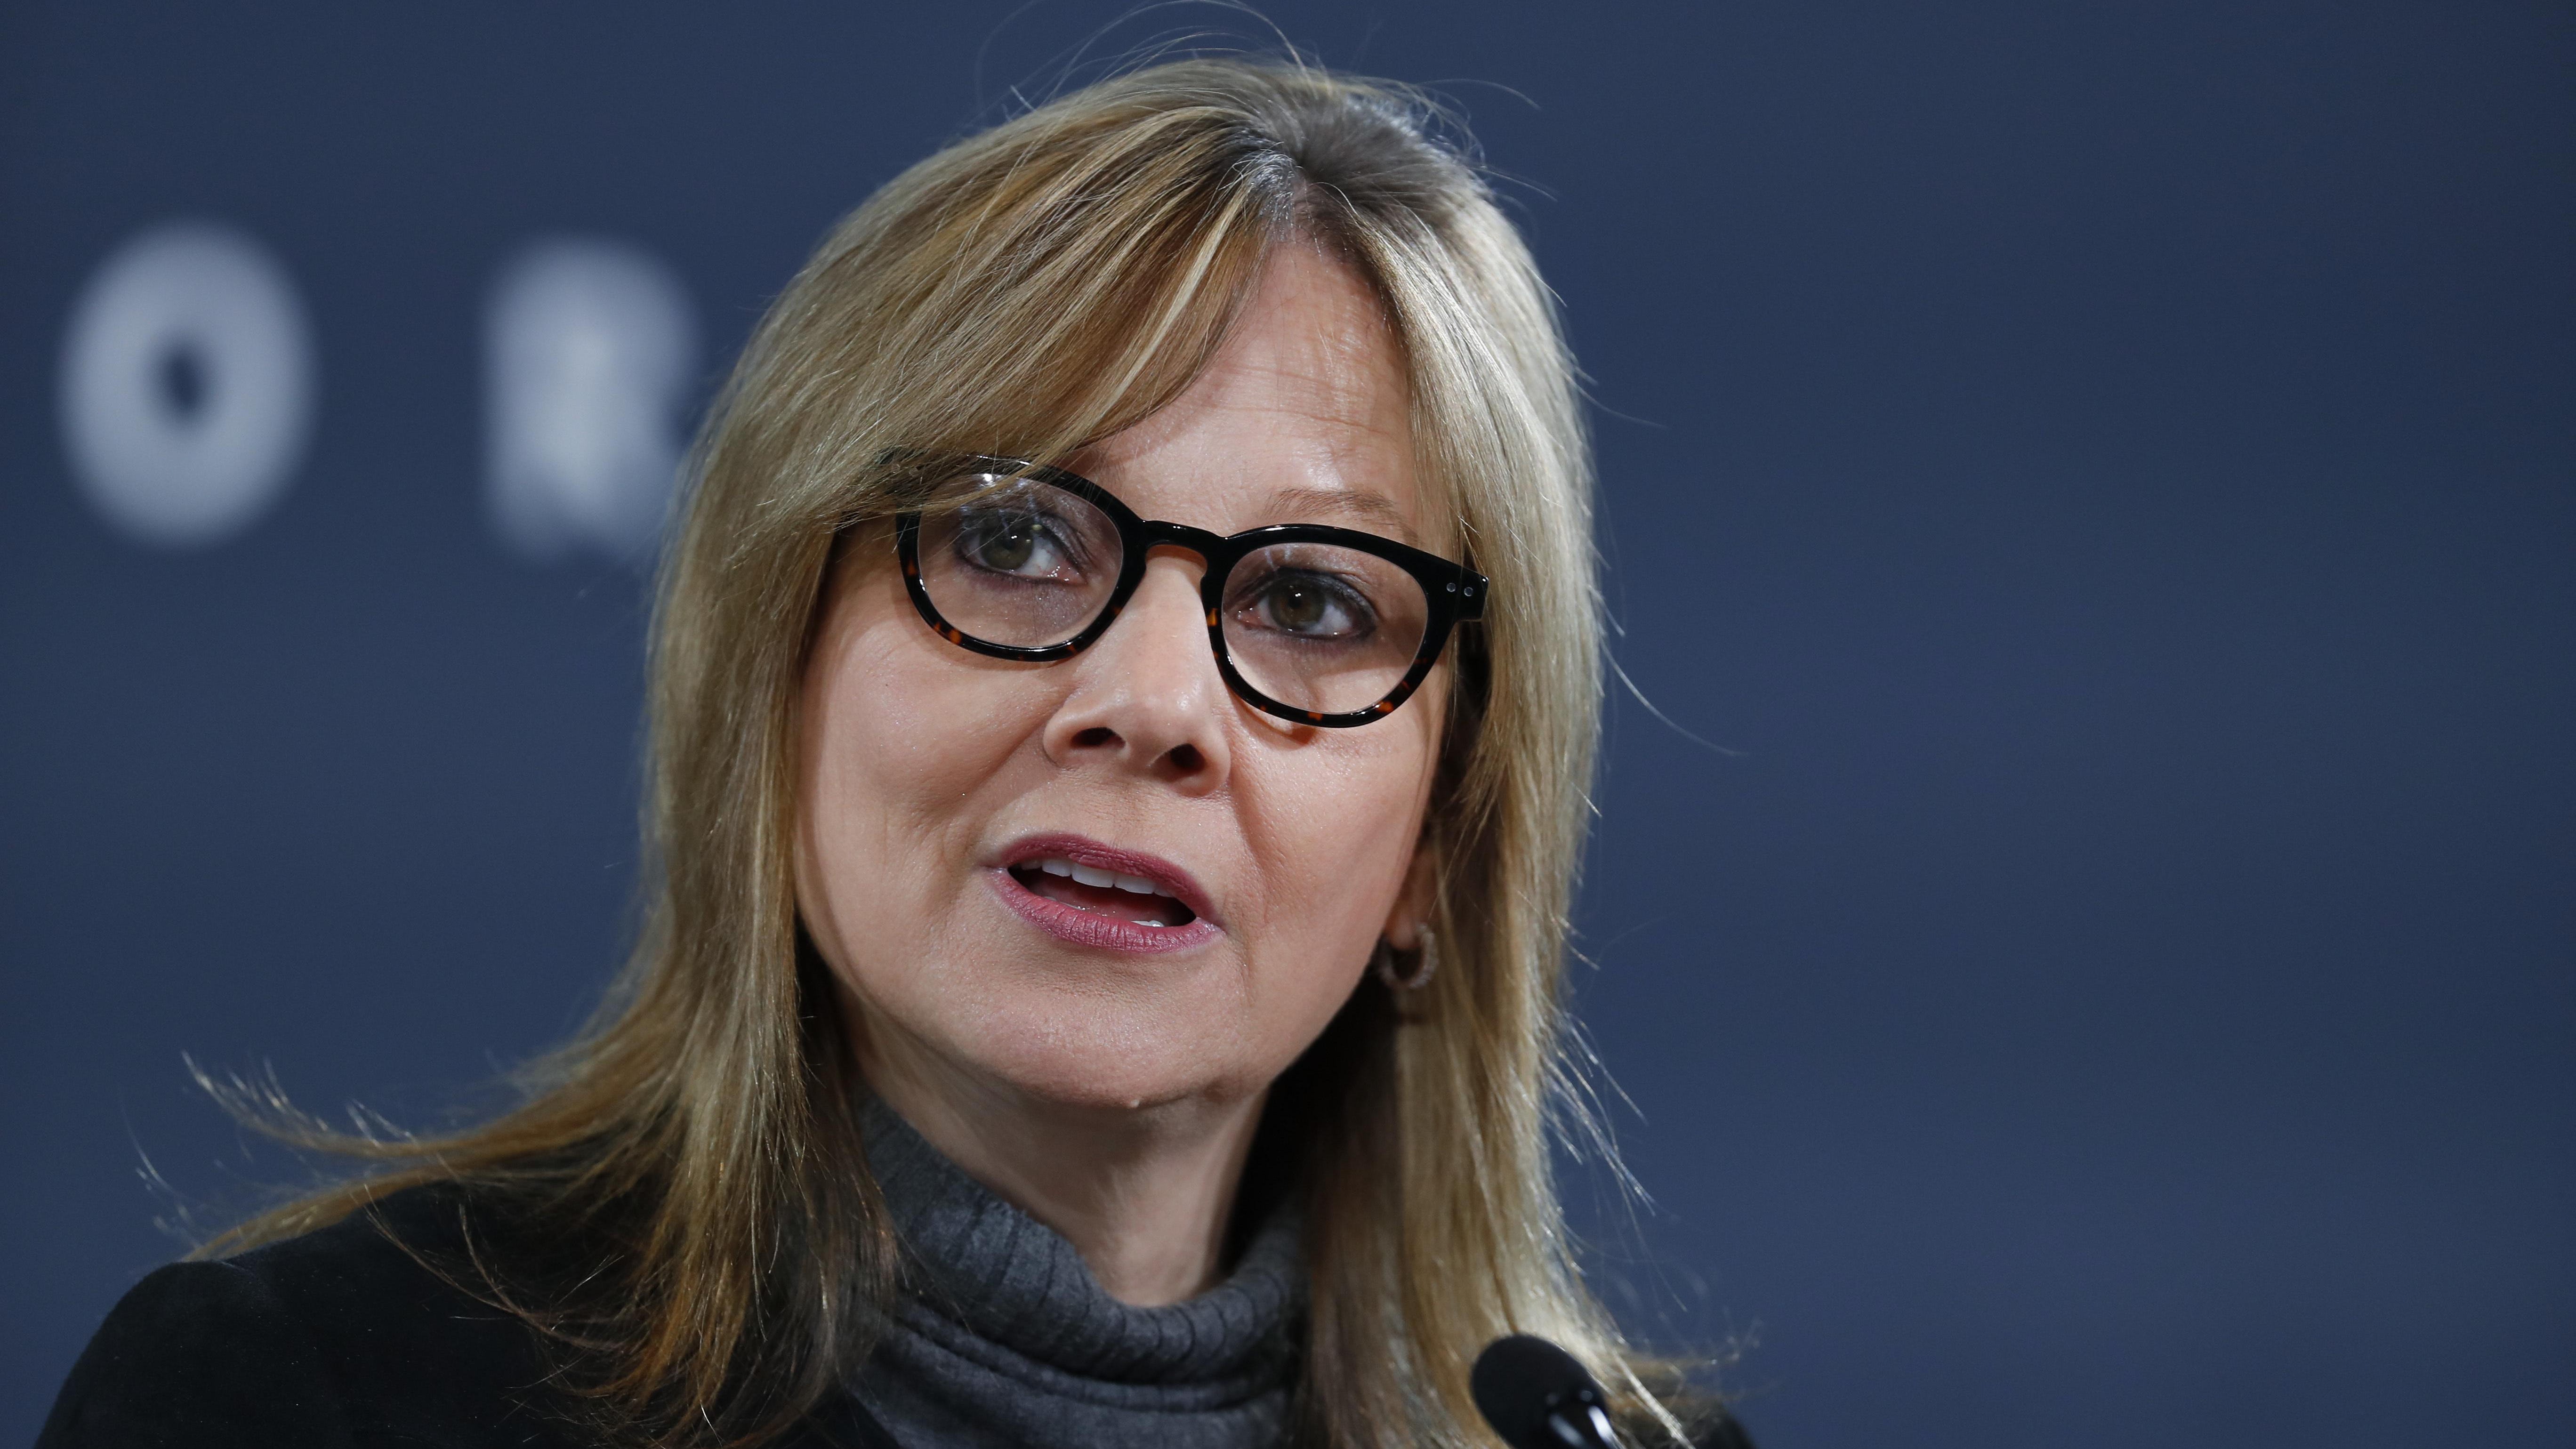 “The best time to solve a problem is the minute you know about it," CEO Mary Barra said at The New York Times DealBook conference earlier this month, where business leaders discussed their industries. "Most problems don’t get smaller with time — and so that’s kind of a fundamental learning.”